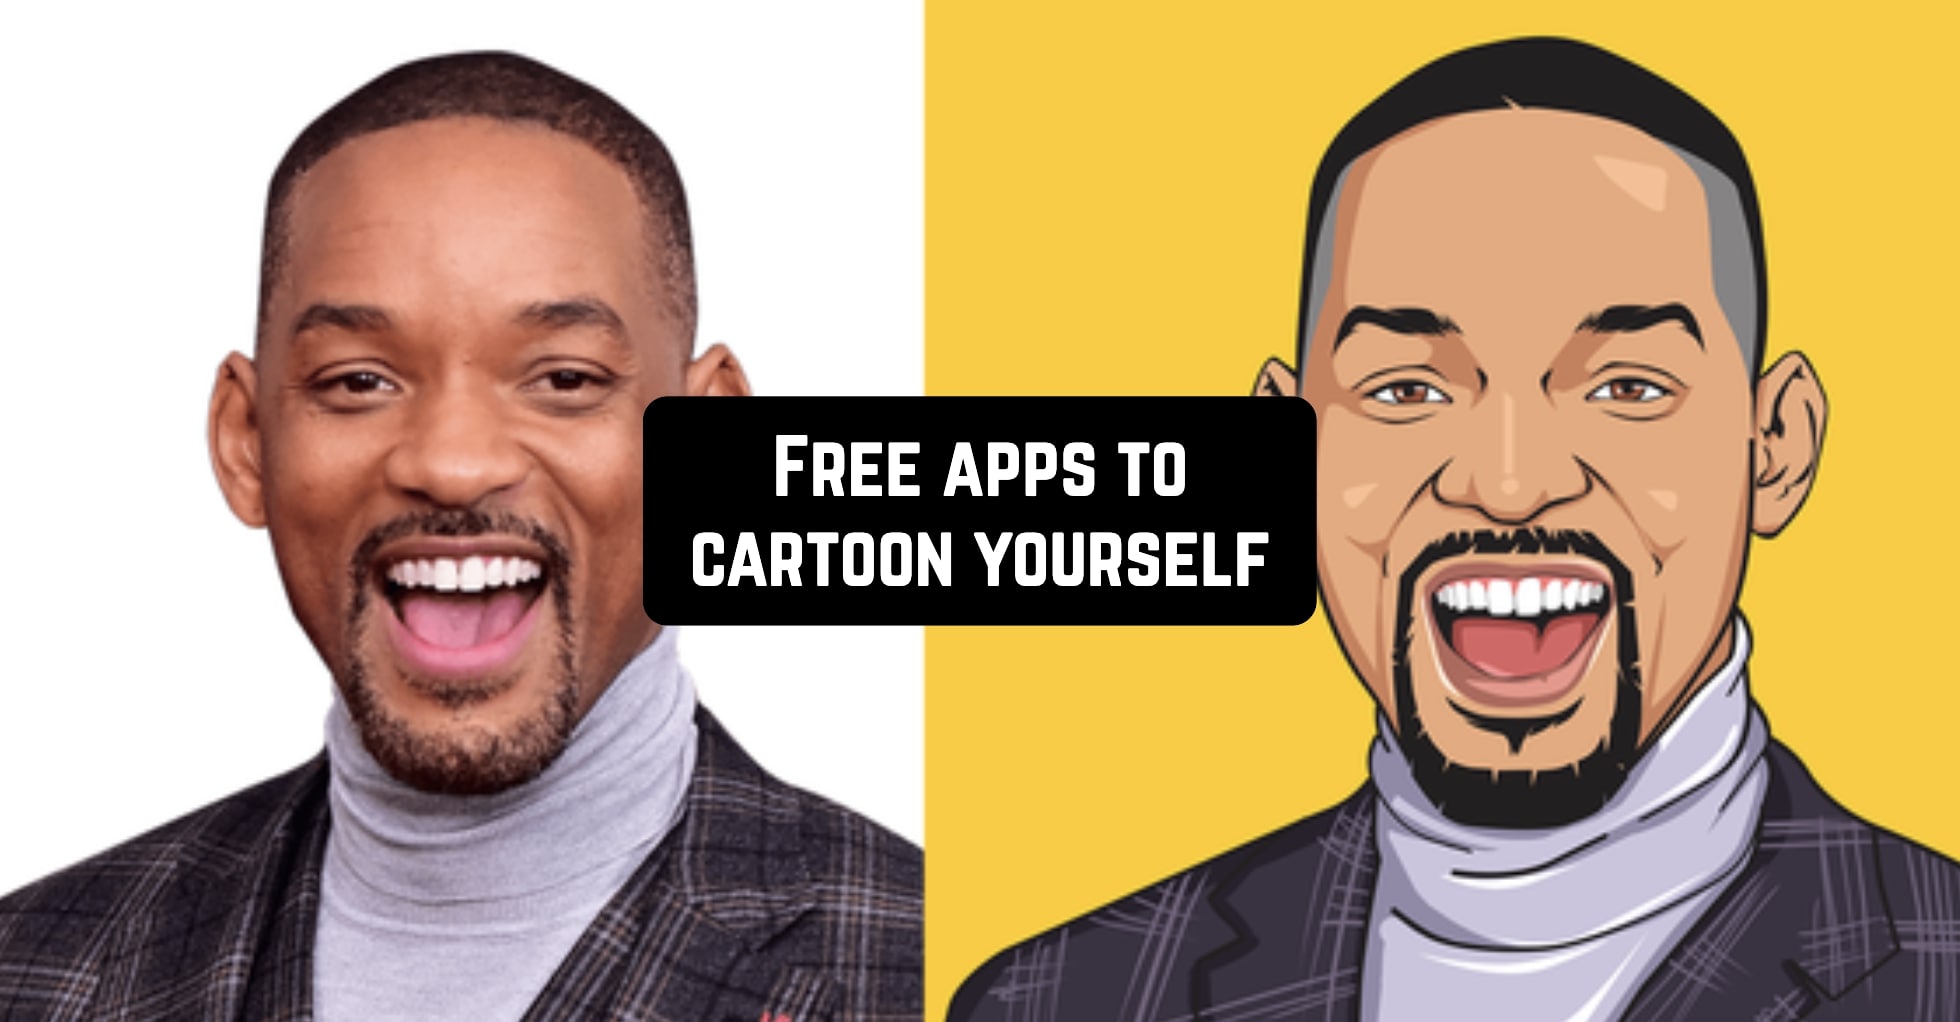 Free apps to cartoon yourself